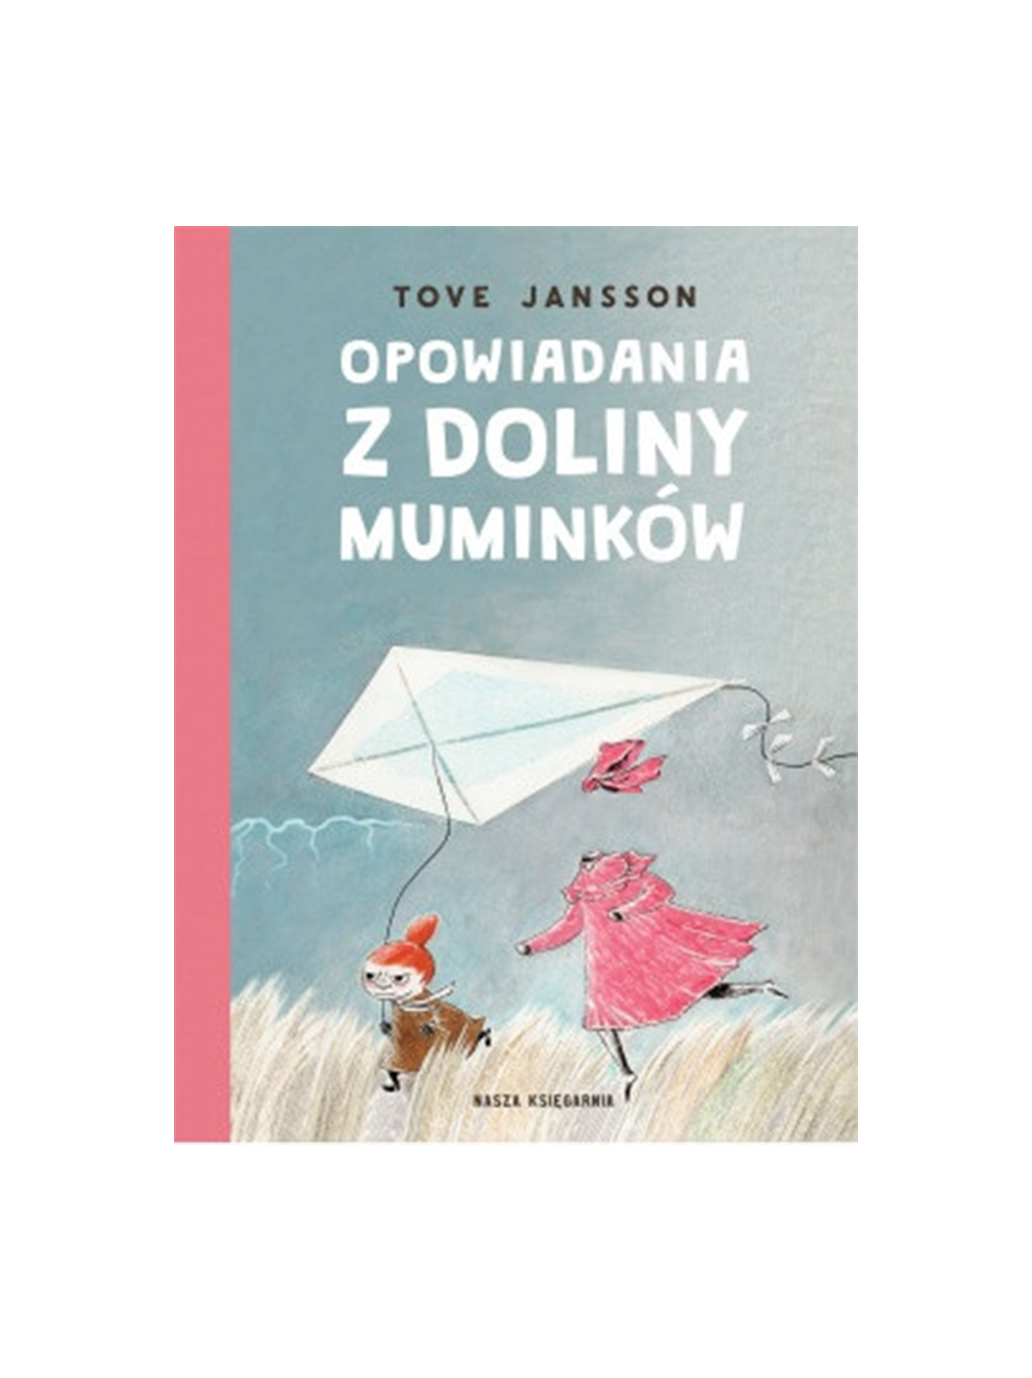 Tales from the Moomin Valley